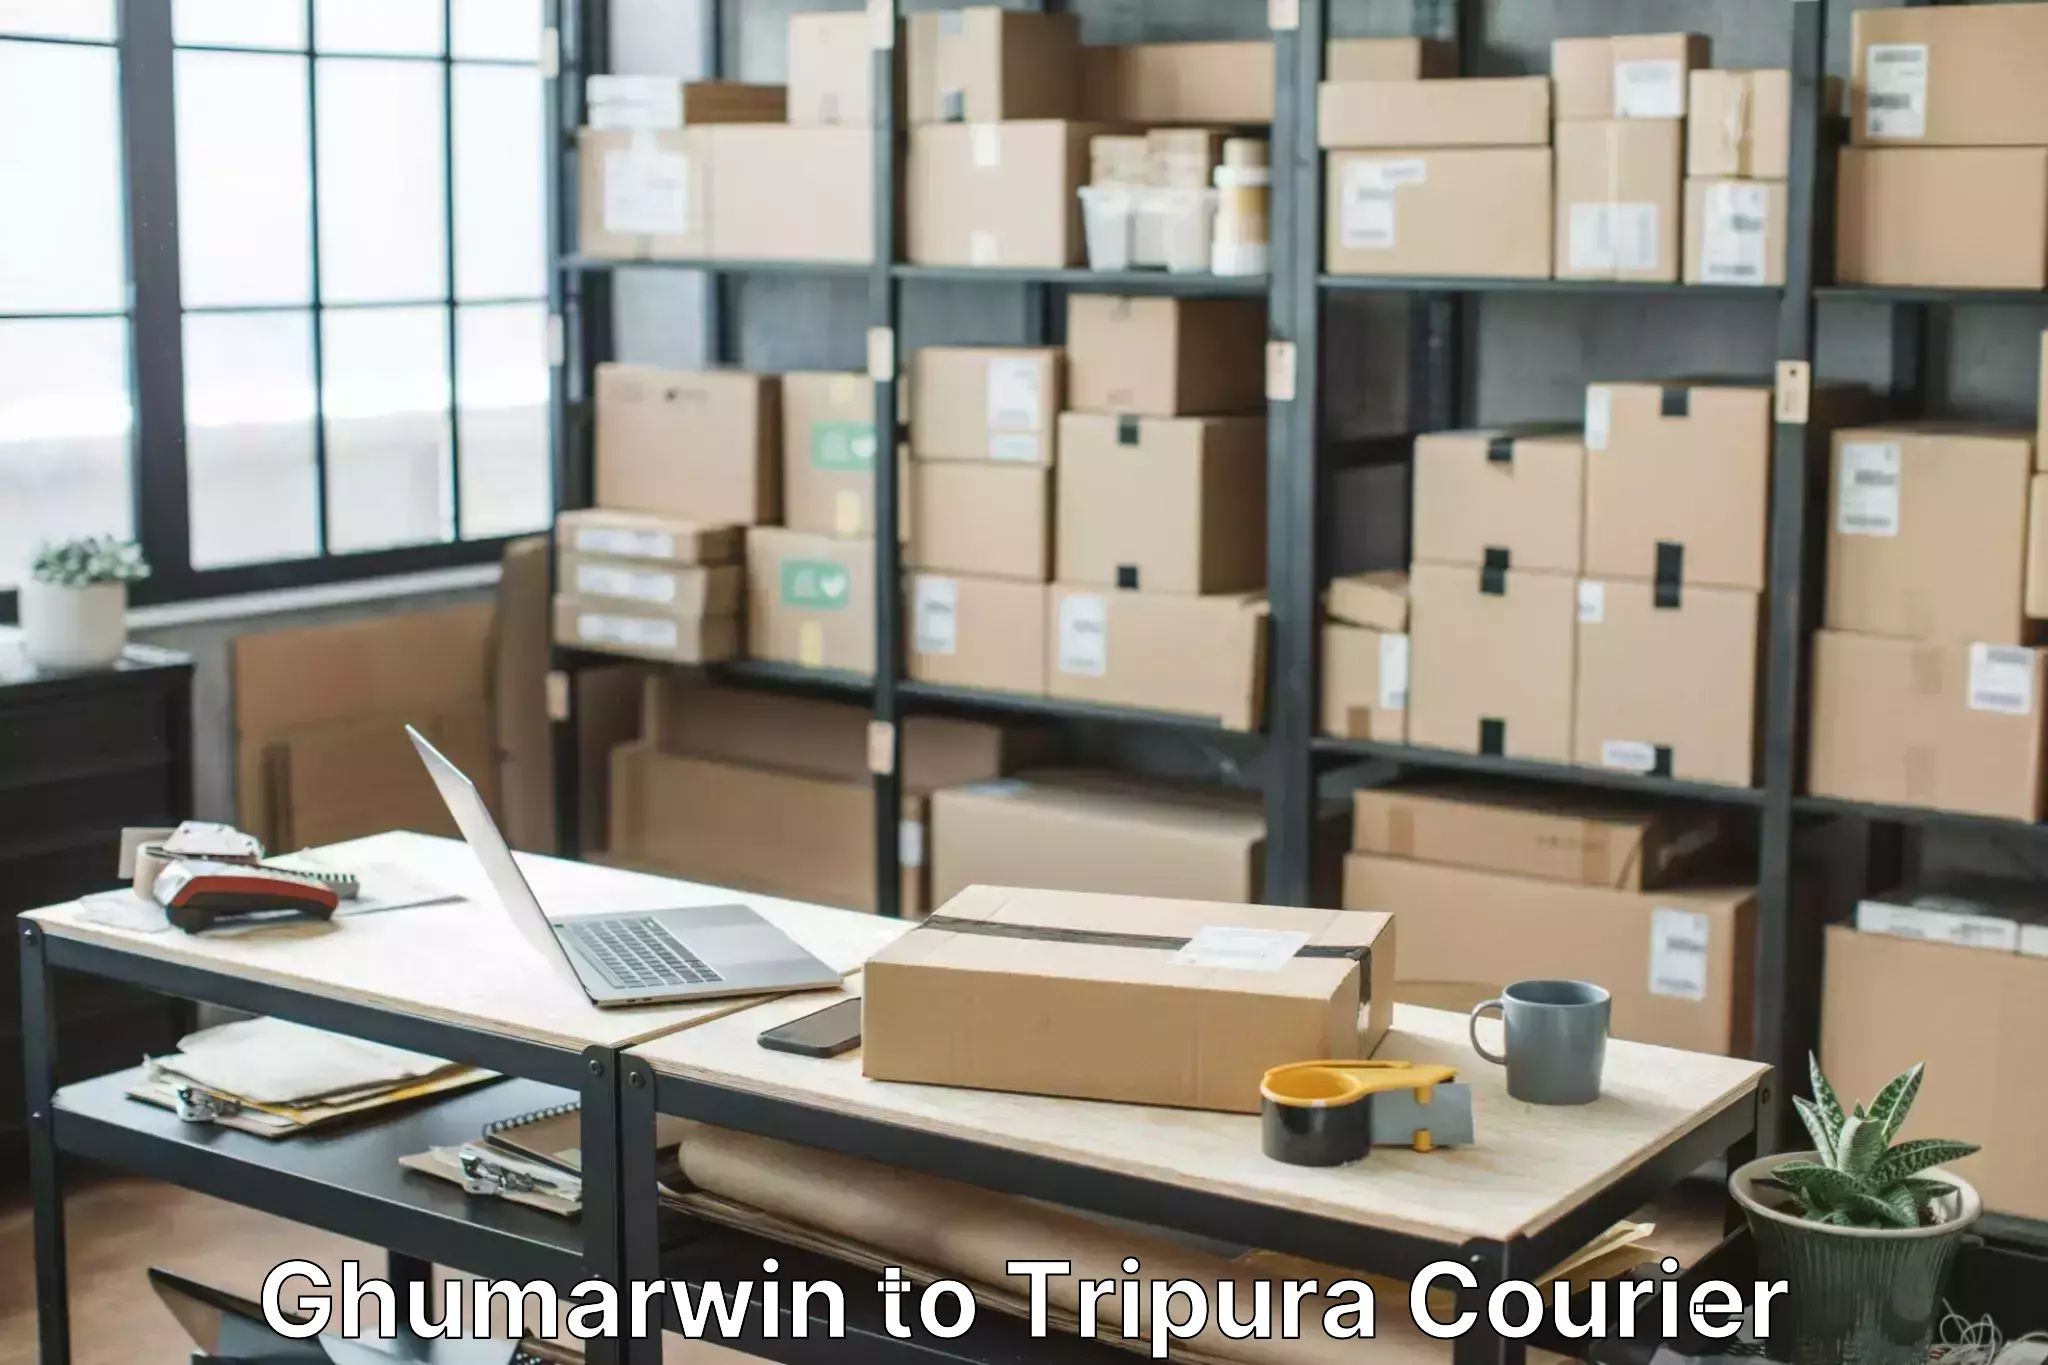 Hassle-free relocation Ghumarwin to Udaipur Tripura